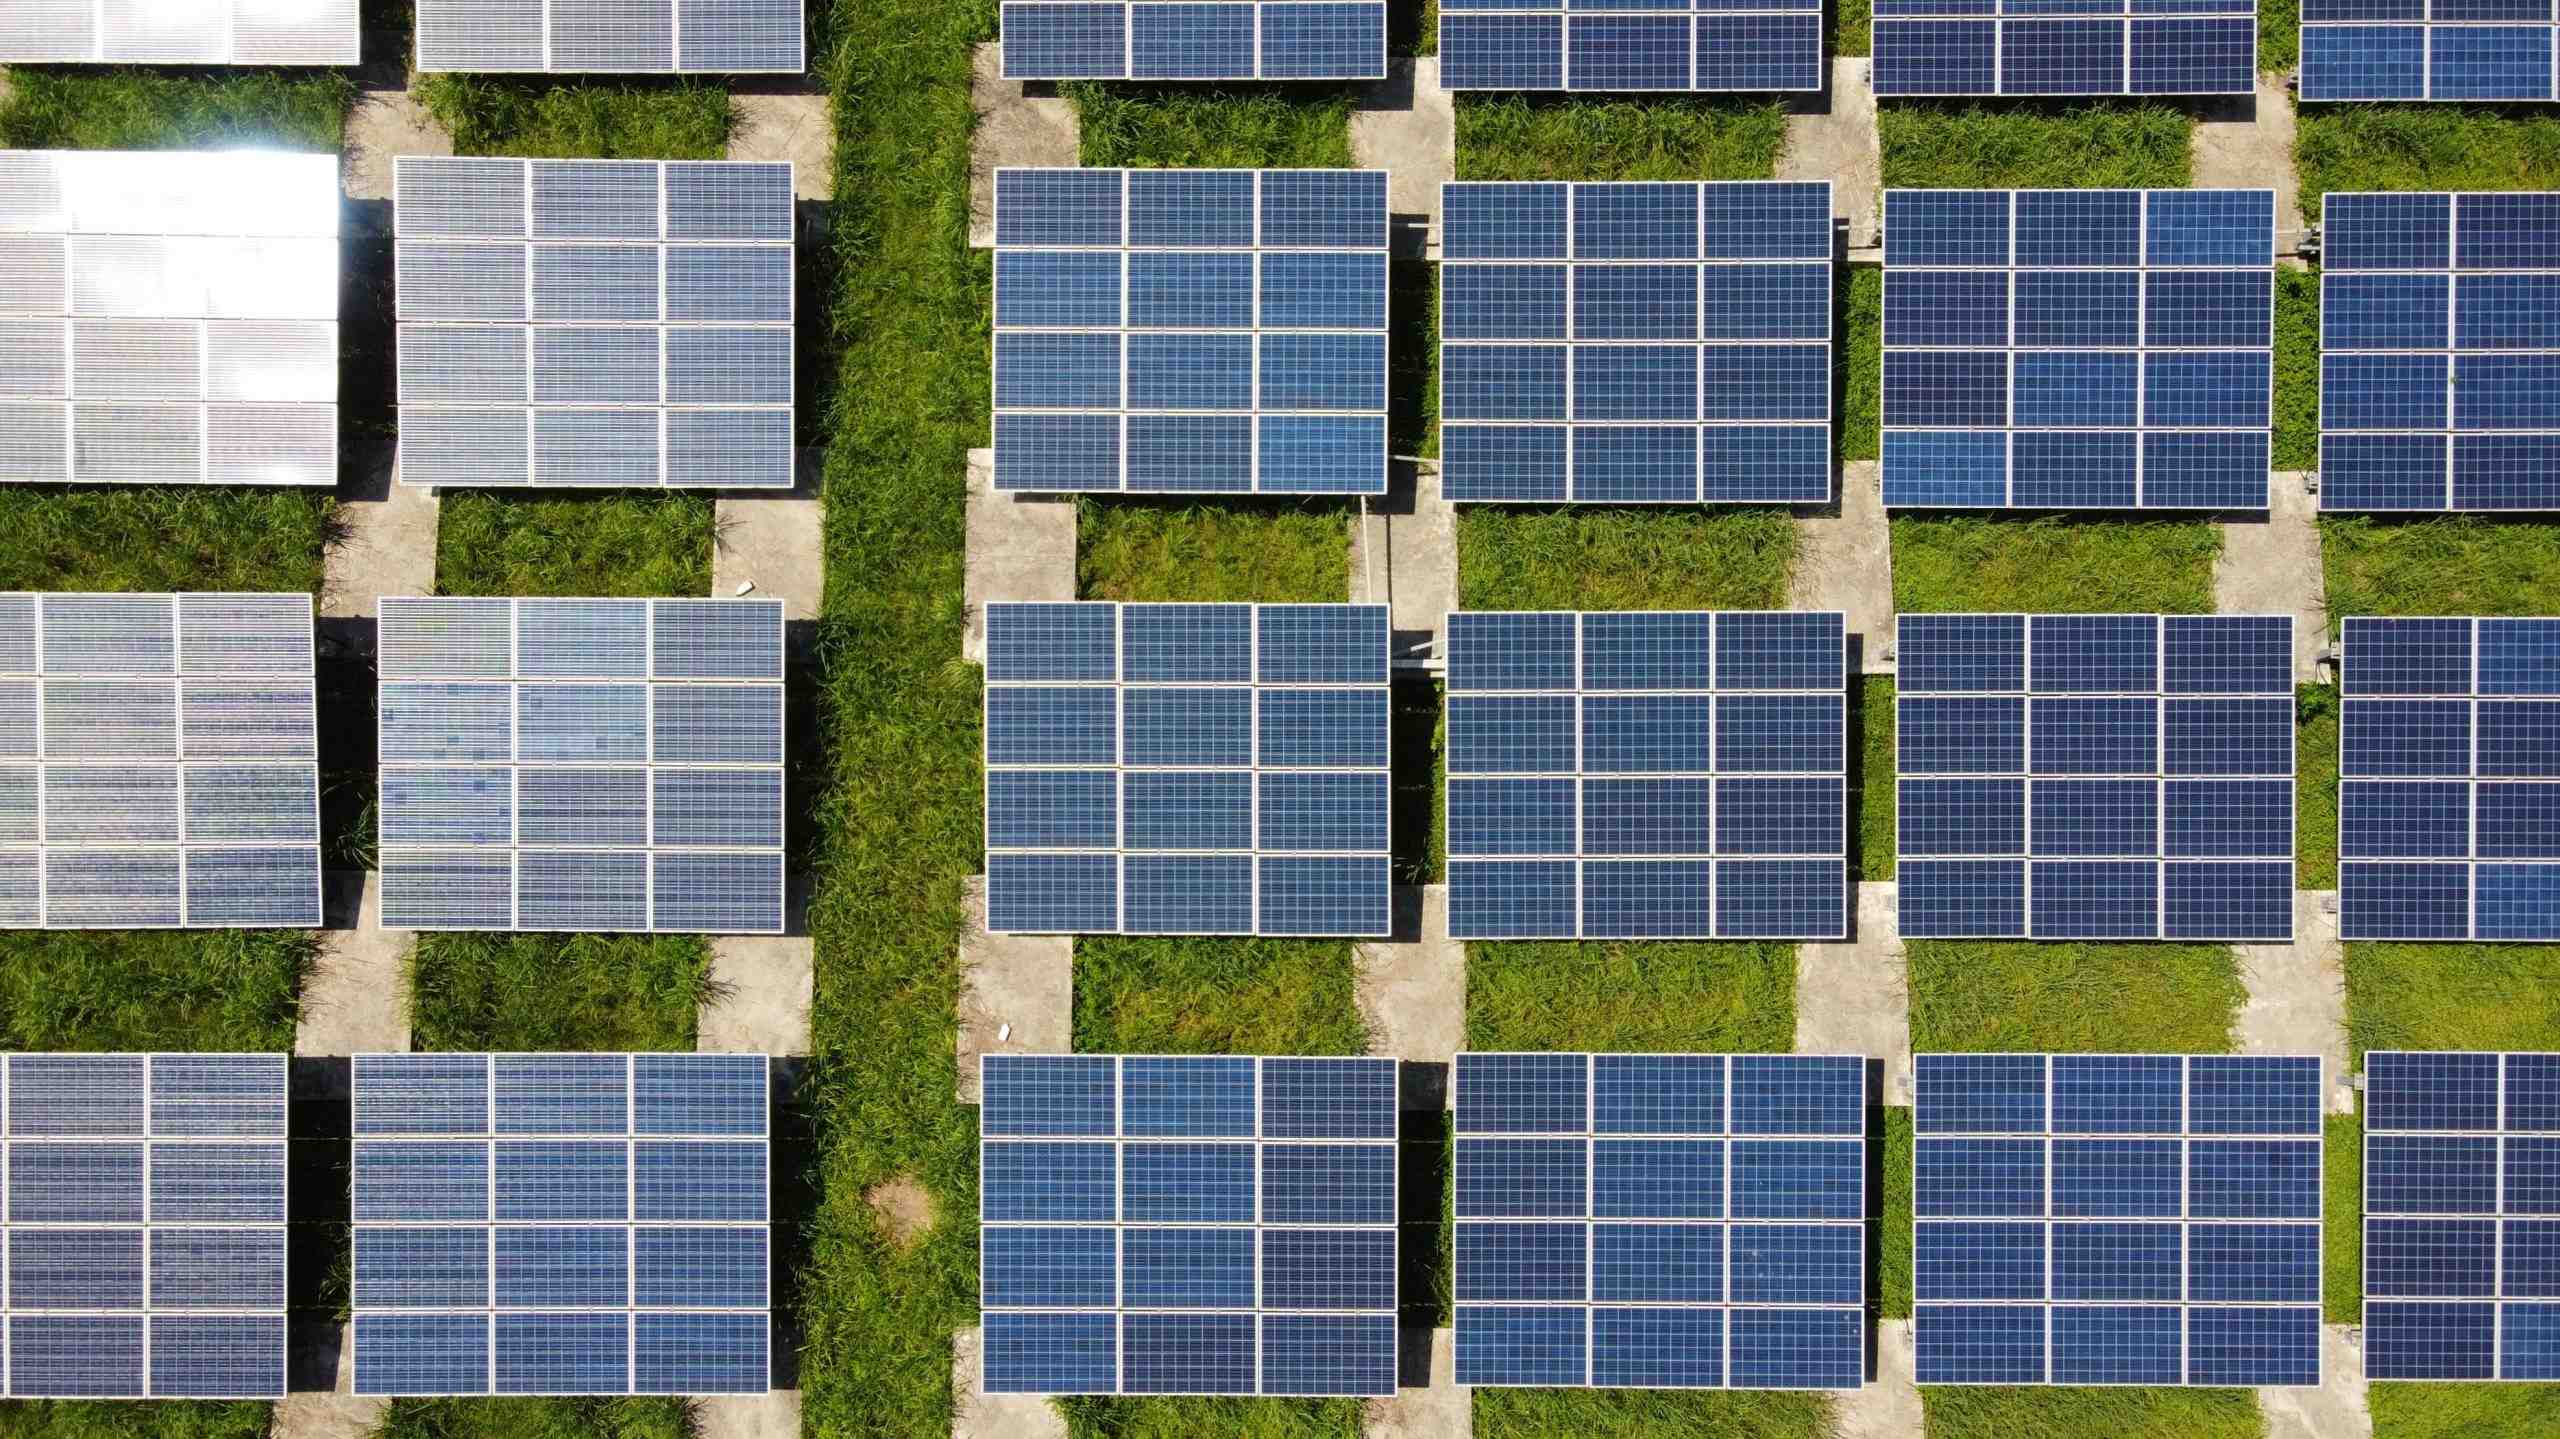 Is it better to purchase or lease solar panels?